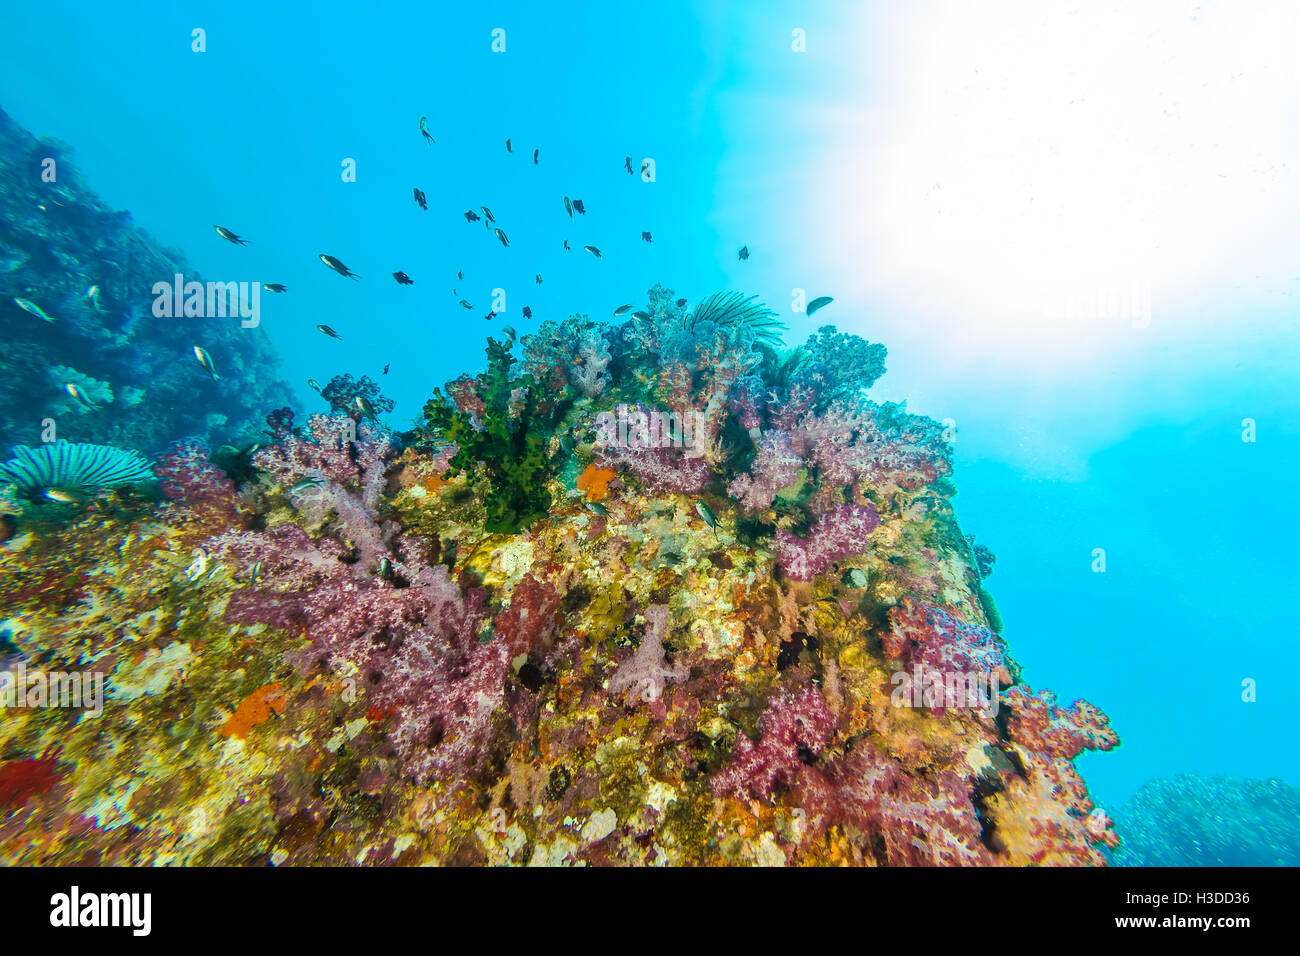 Underwater picture of colorful coral reef Stock Photo